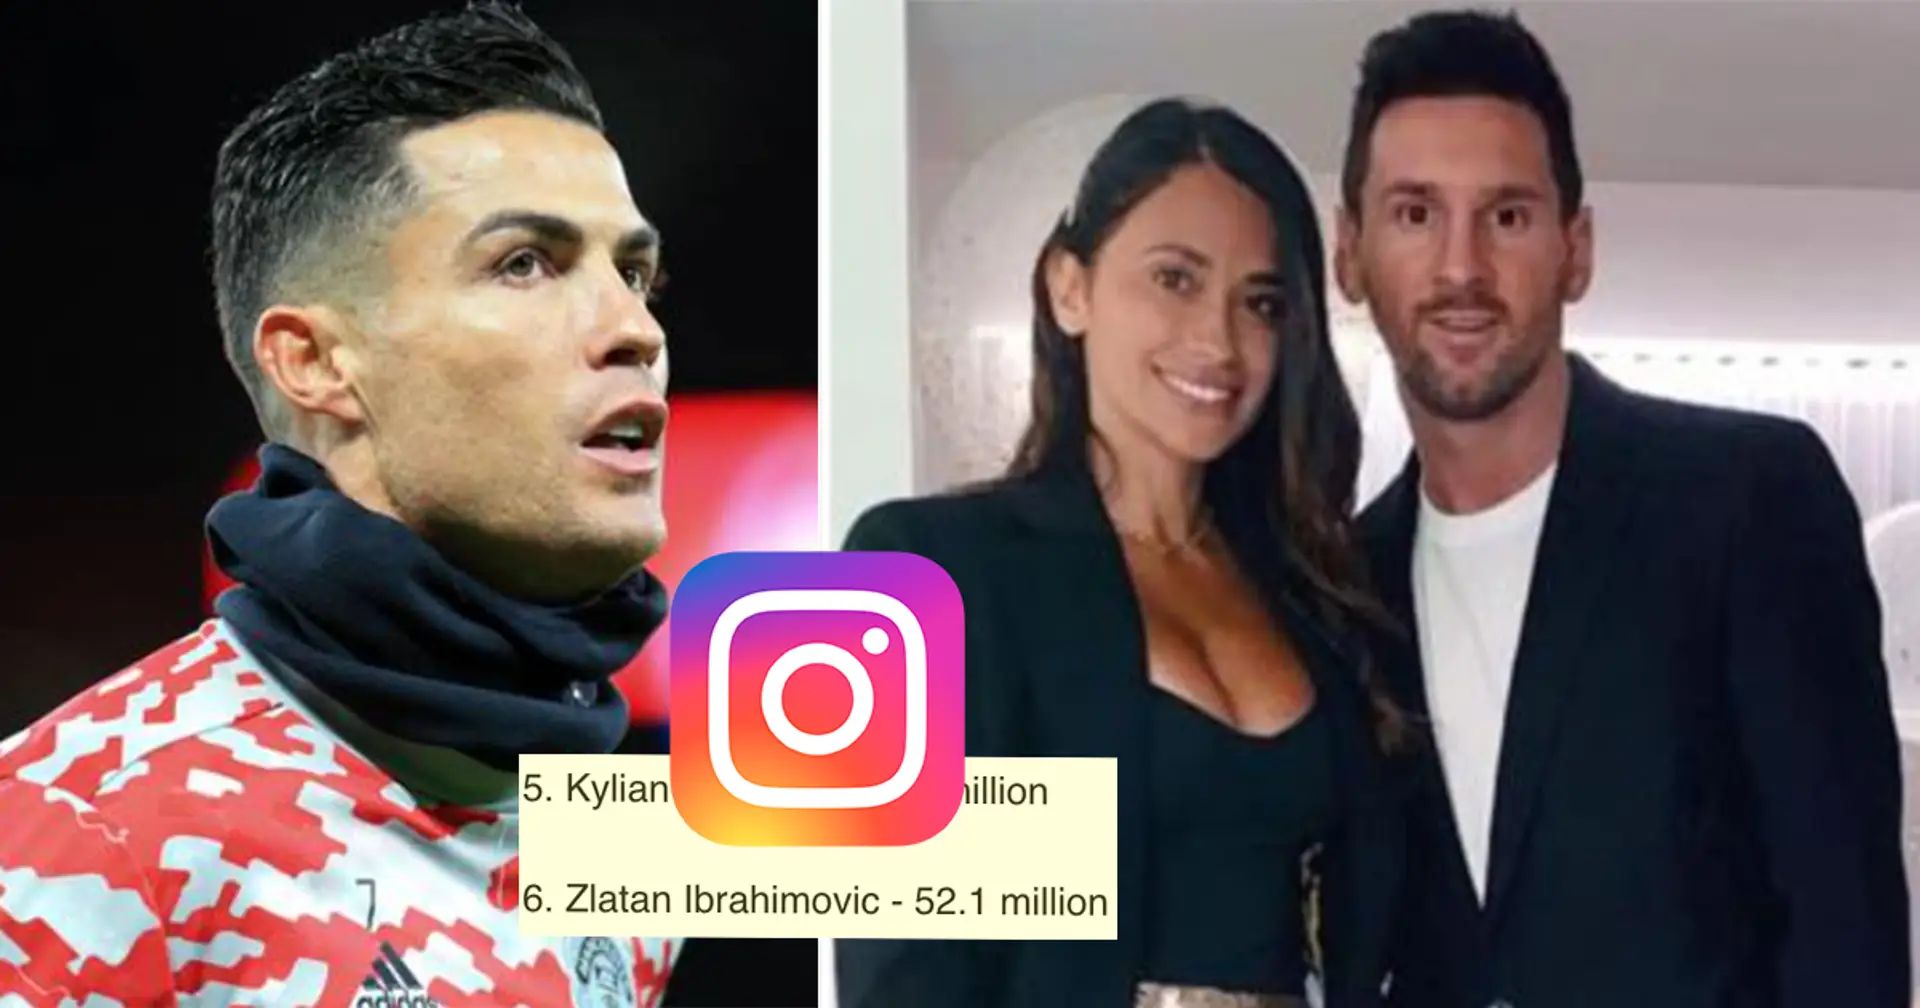 Messi reaches 300 million, Ronaldo still ahead: Top 10 players with most Instagram followers 